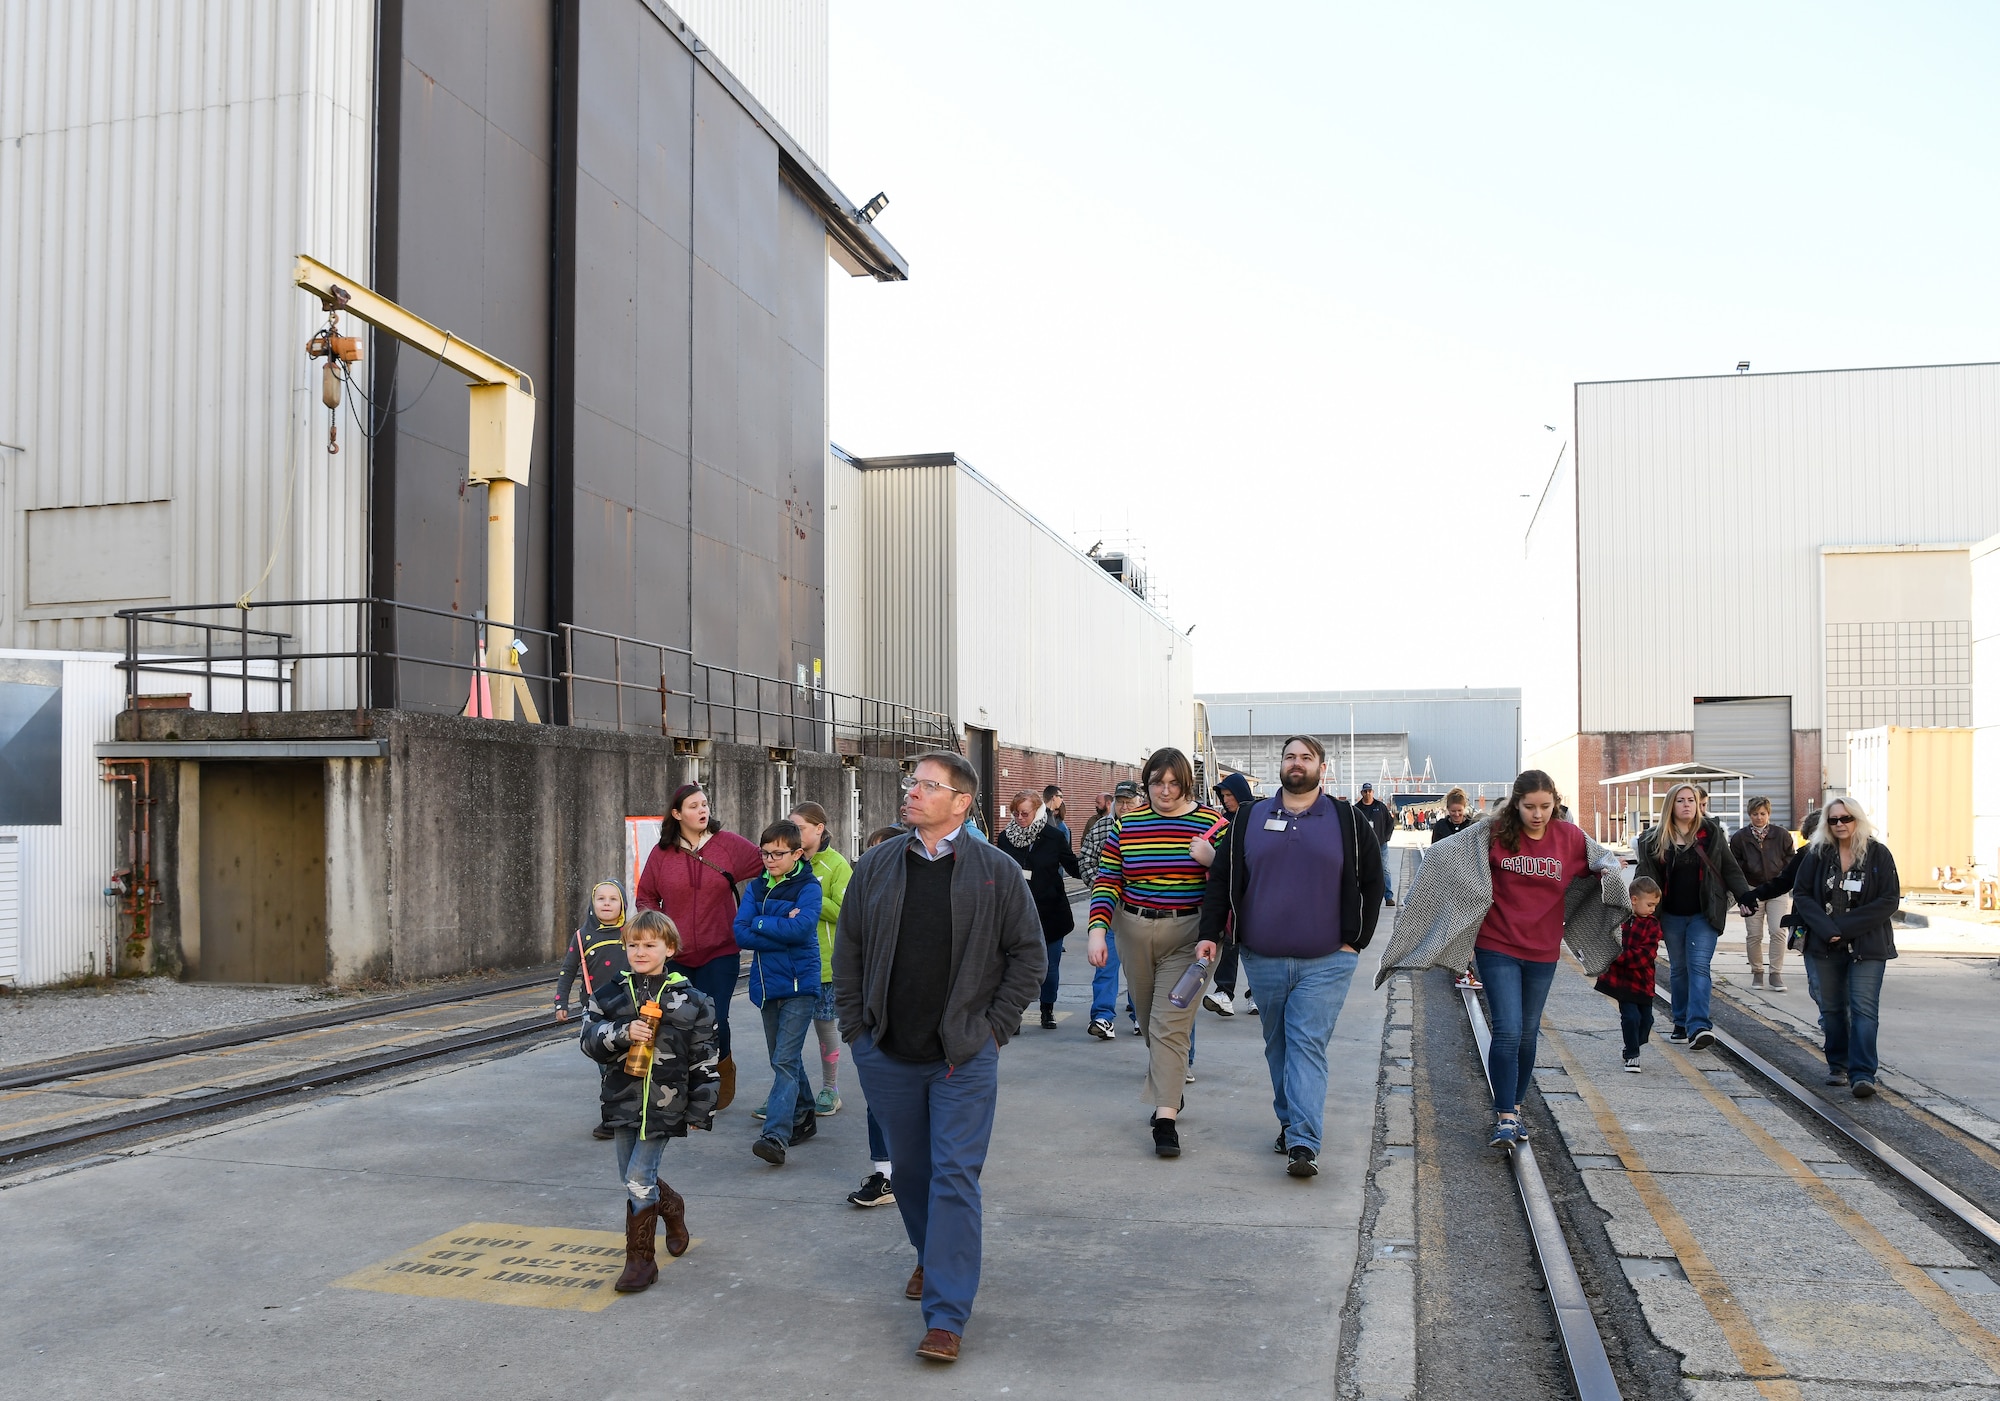 Group of people walking outside in an industrial area